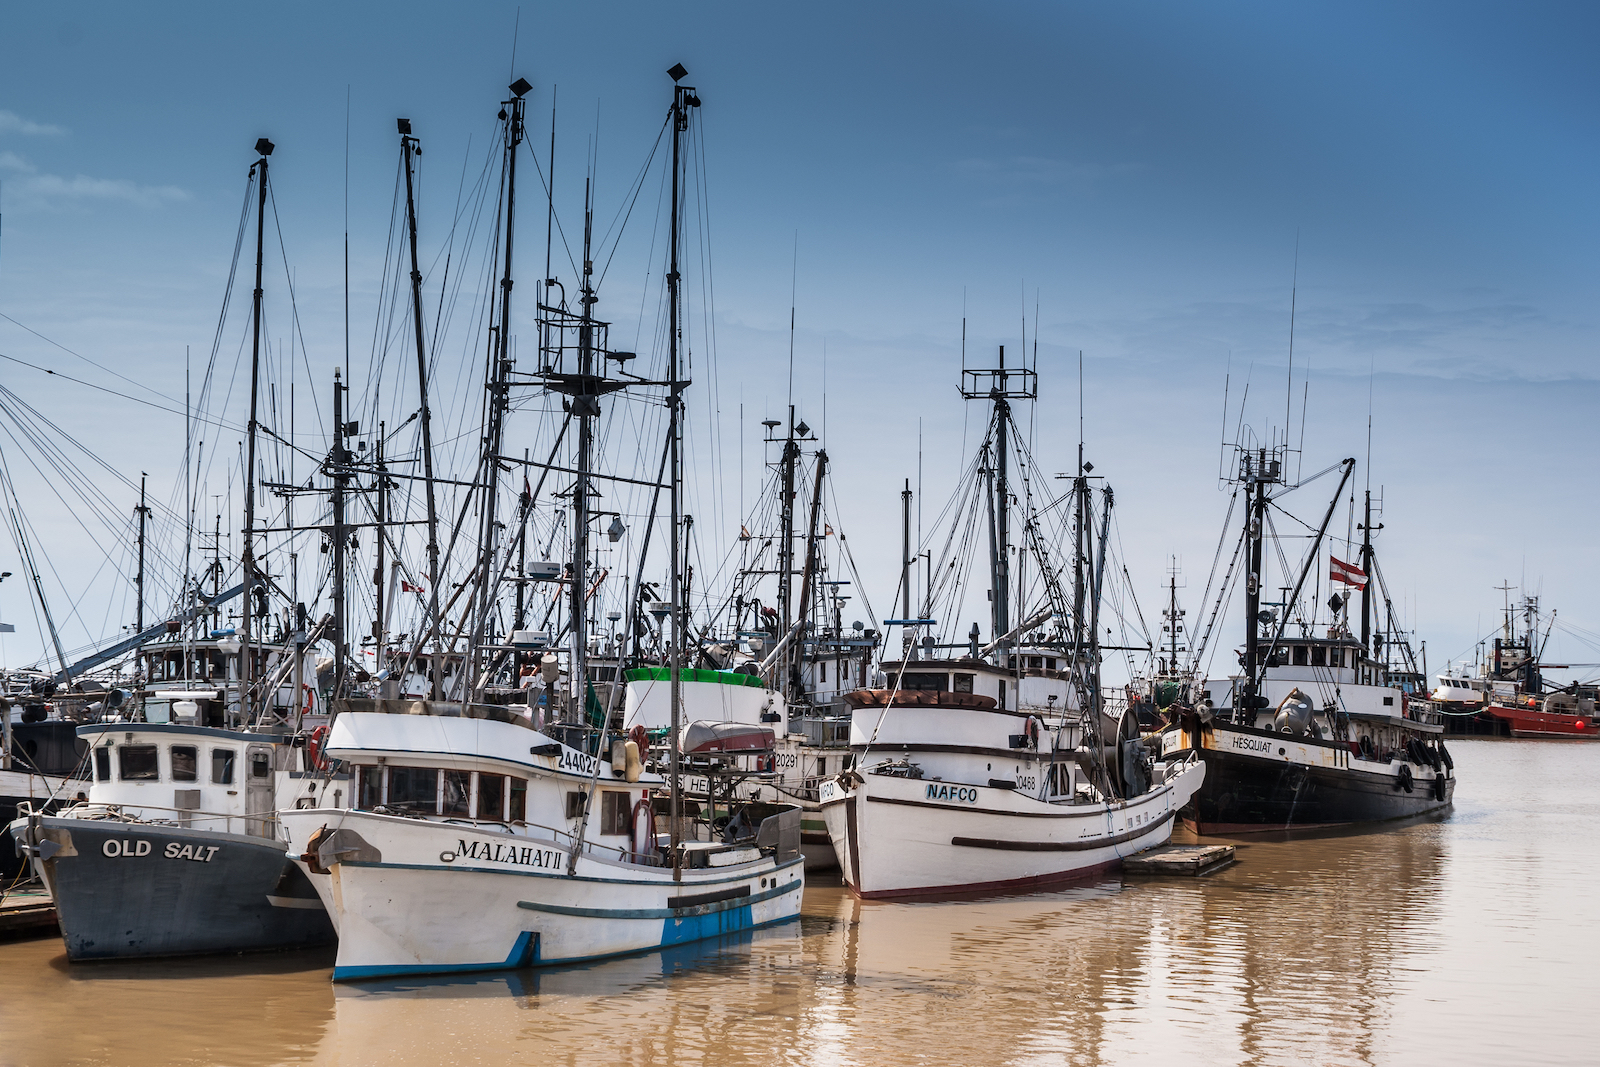 A fleet of fishing boats docked in Steveston, B.C. on a bright sunny day against a blue sky.